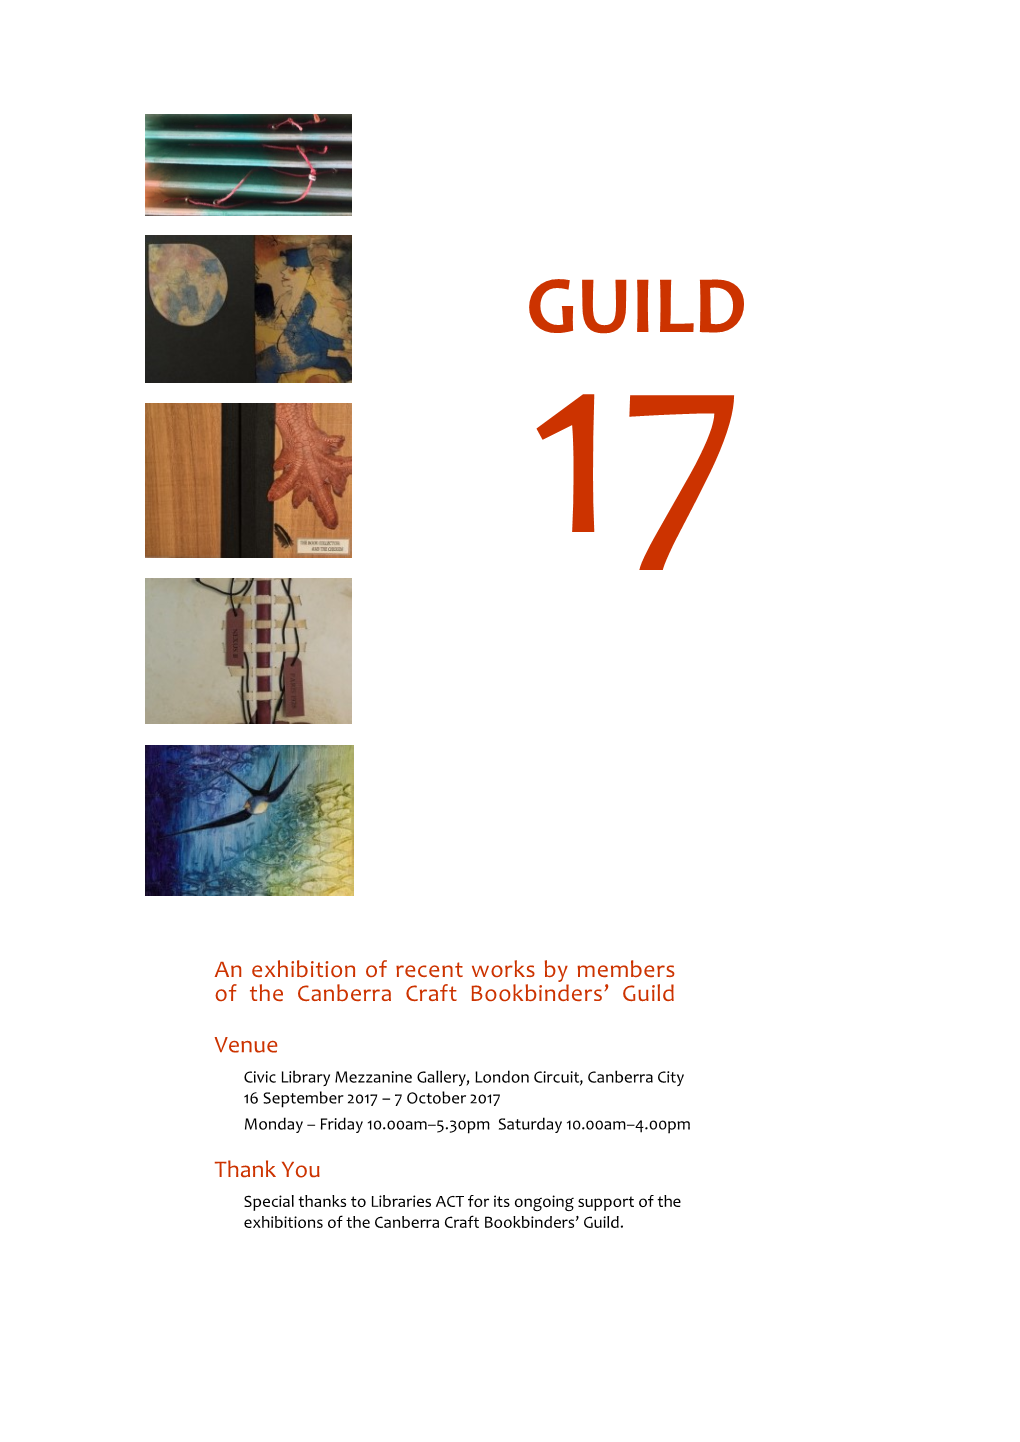 An Exhibition of Recent Works by Members of the Canberra Craft Bookbinders’ Guild